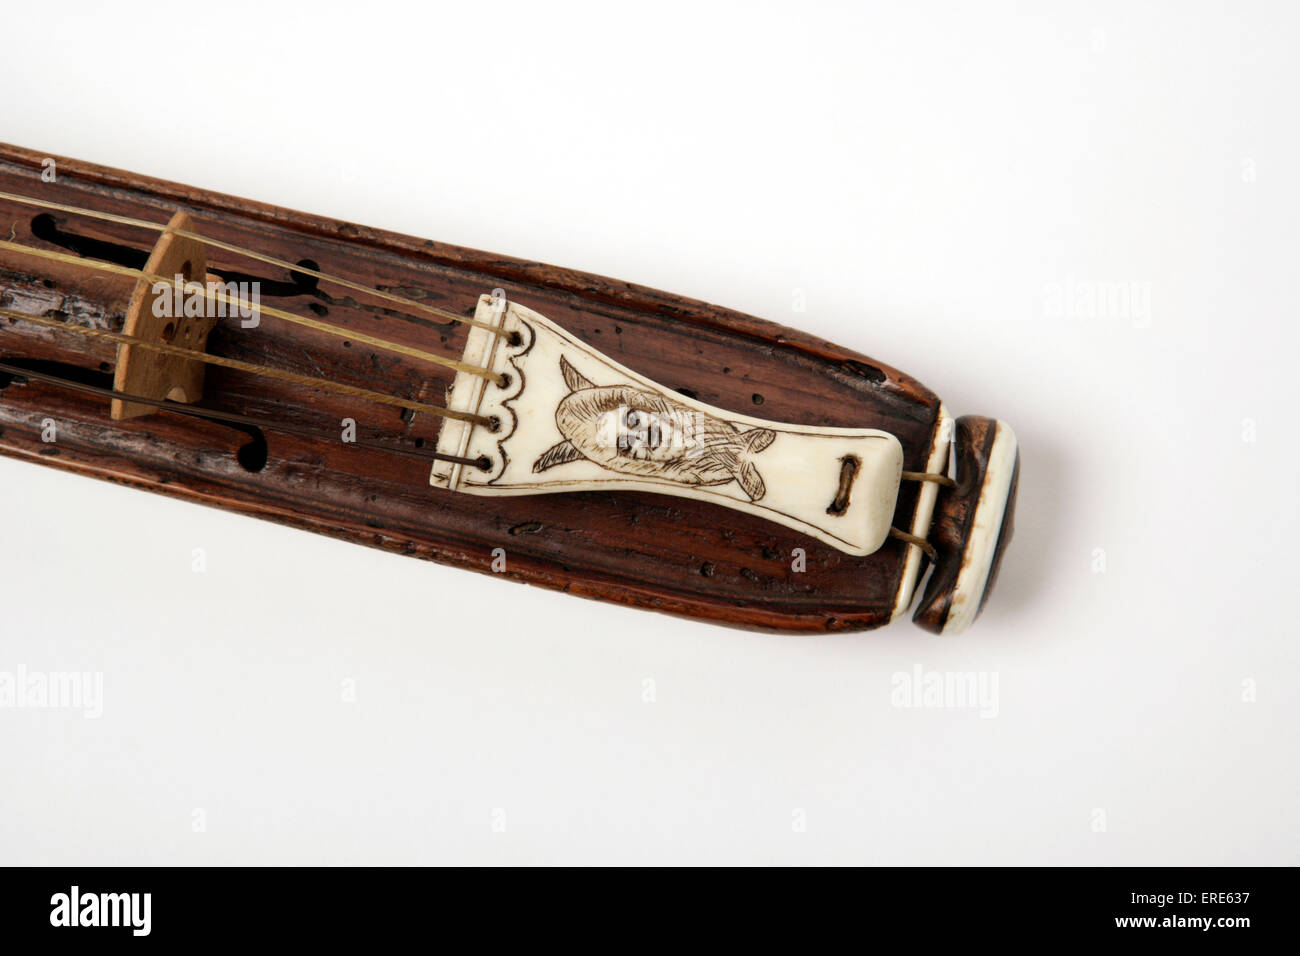 Pochette or dancing kit made from wood and carved ivory, used by dancing masters and kept in their pocket, or poche, hence the Stock Photo